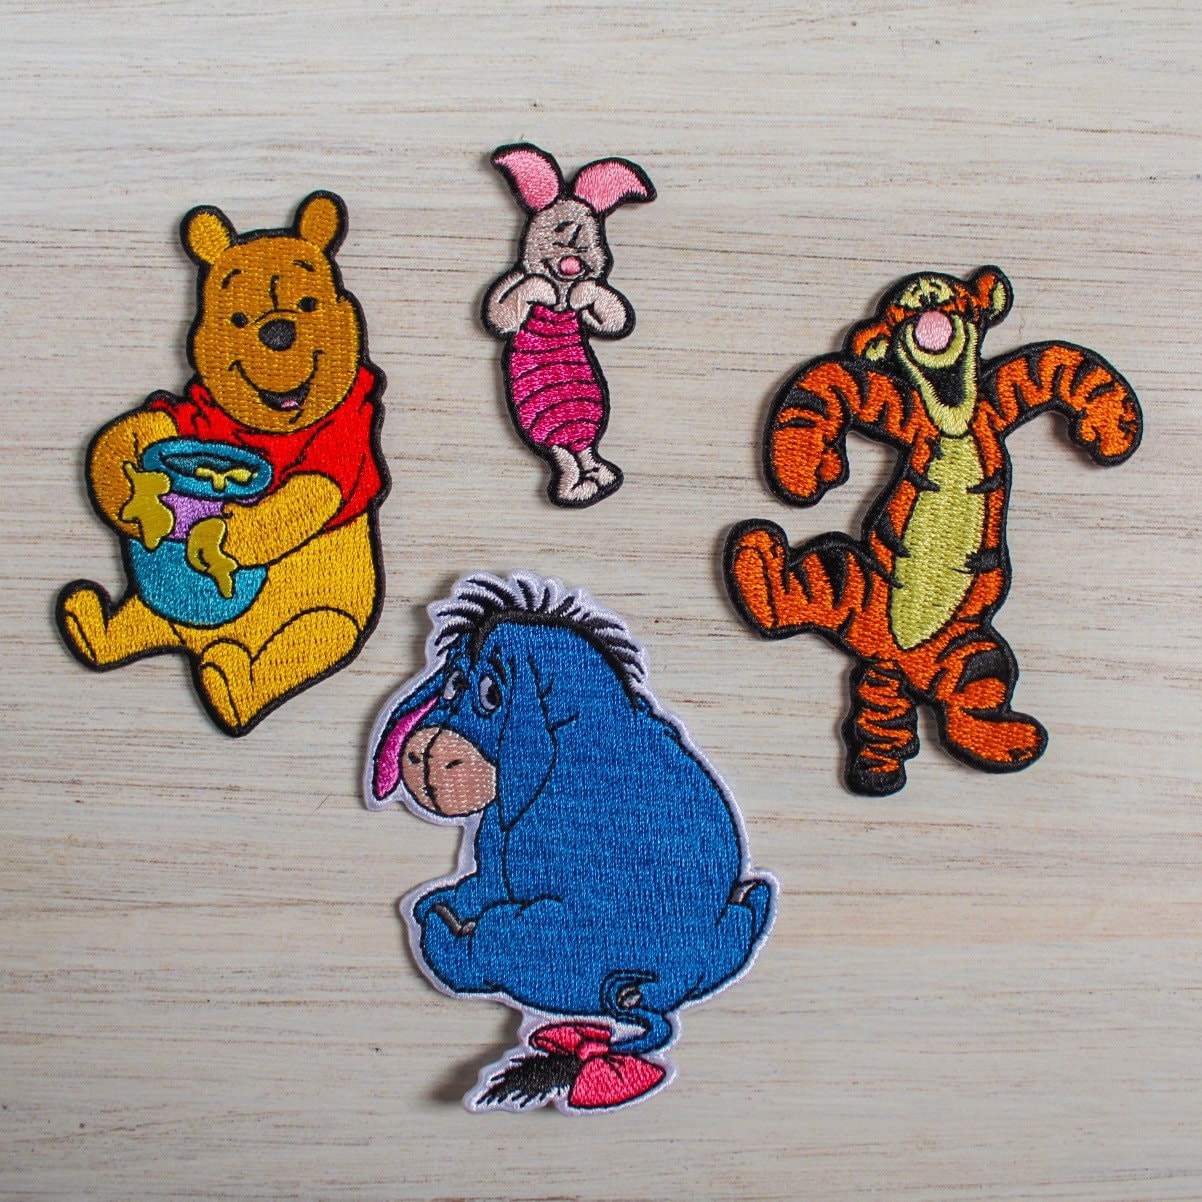  Rabbit Gathering Carrots Patch Disney Winnie The Pooh Character  Iron On Applique